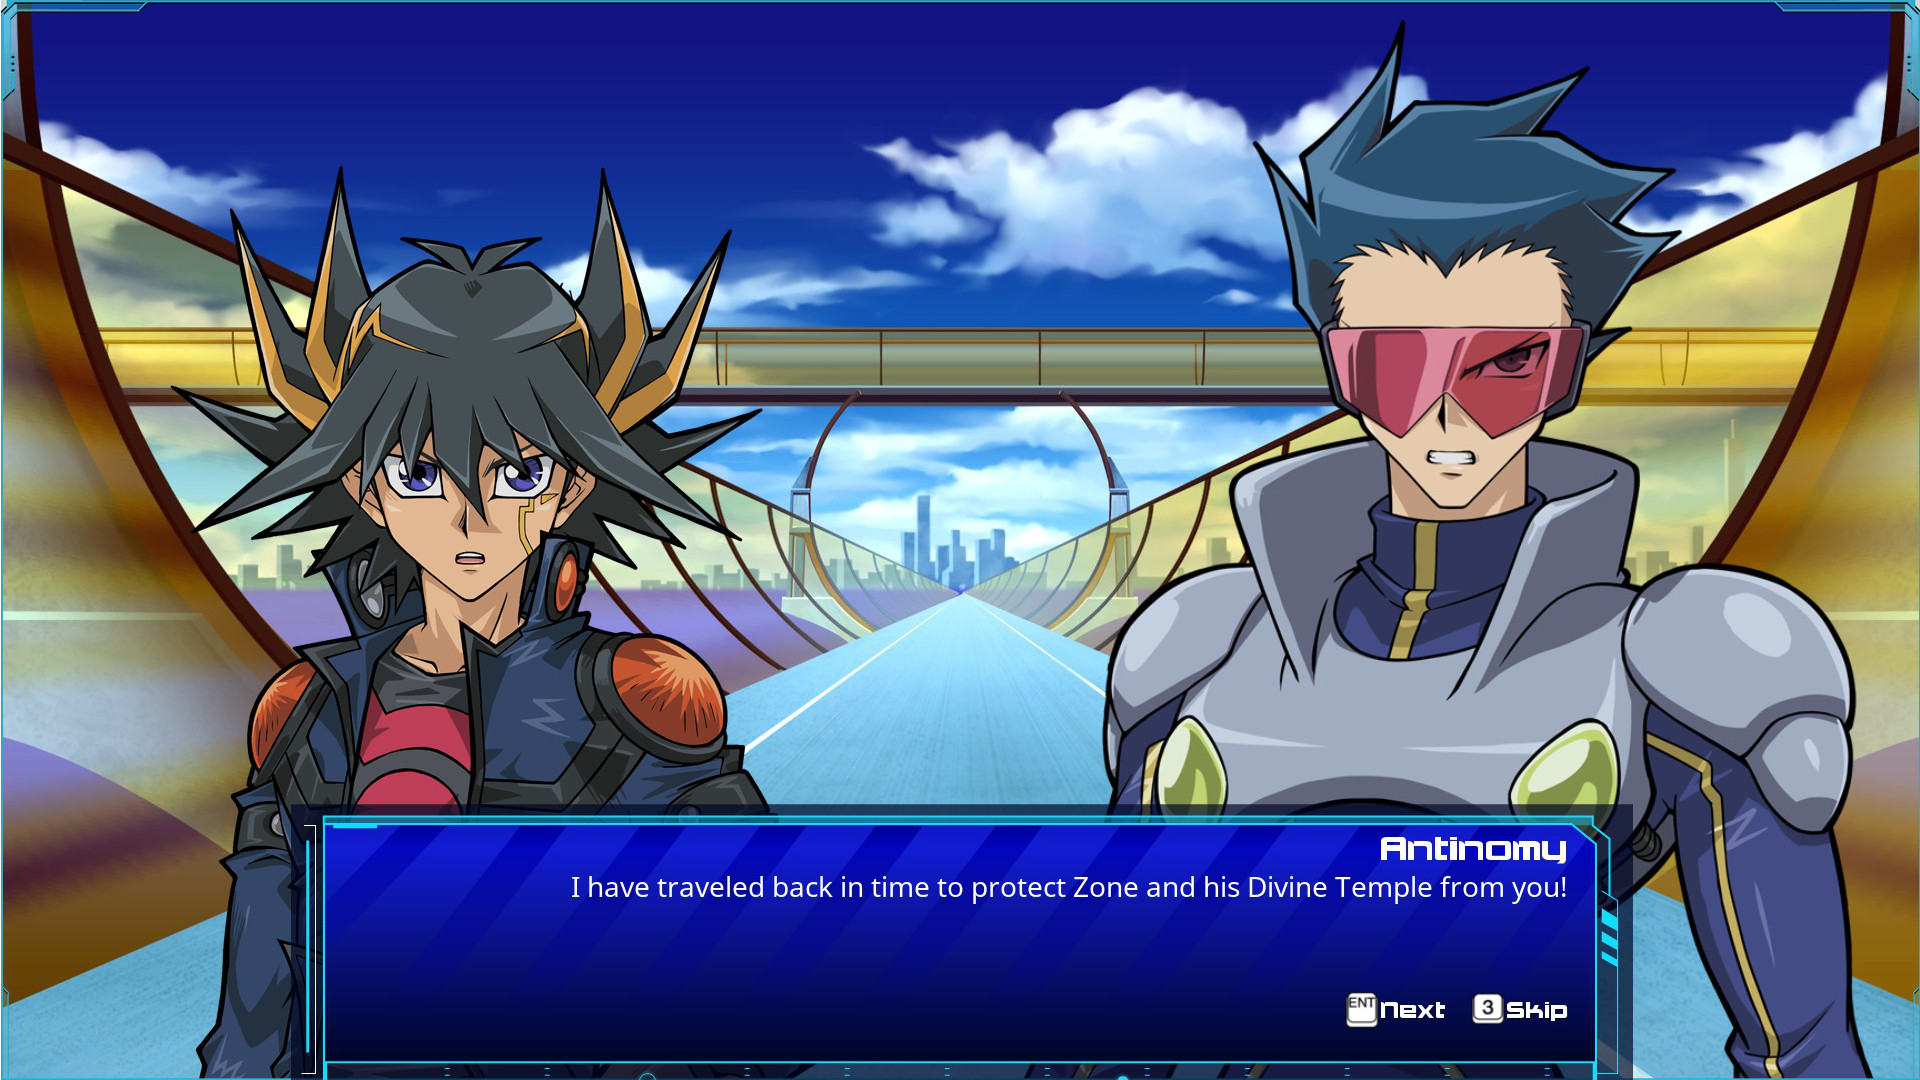 Yu-Gi-Oh! - 5D’s For the Future DLC Steam CD Key [$ 1.04]